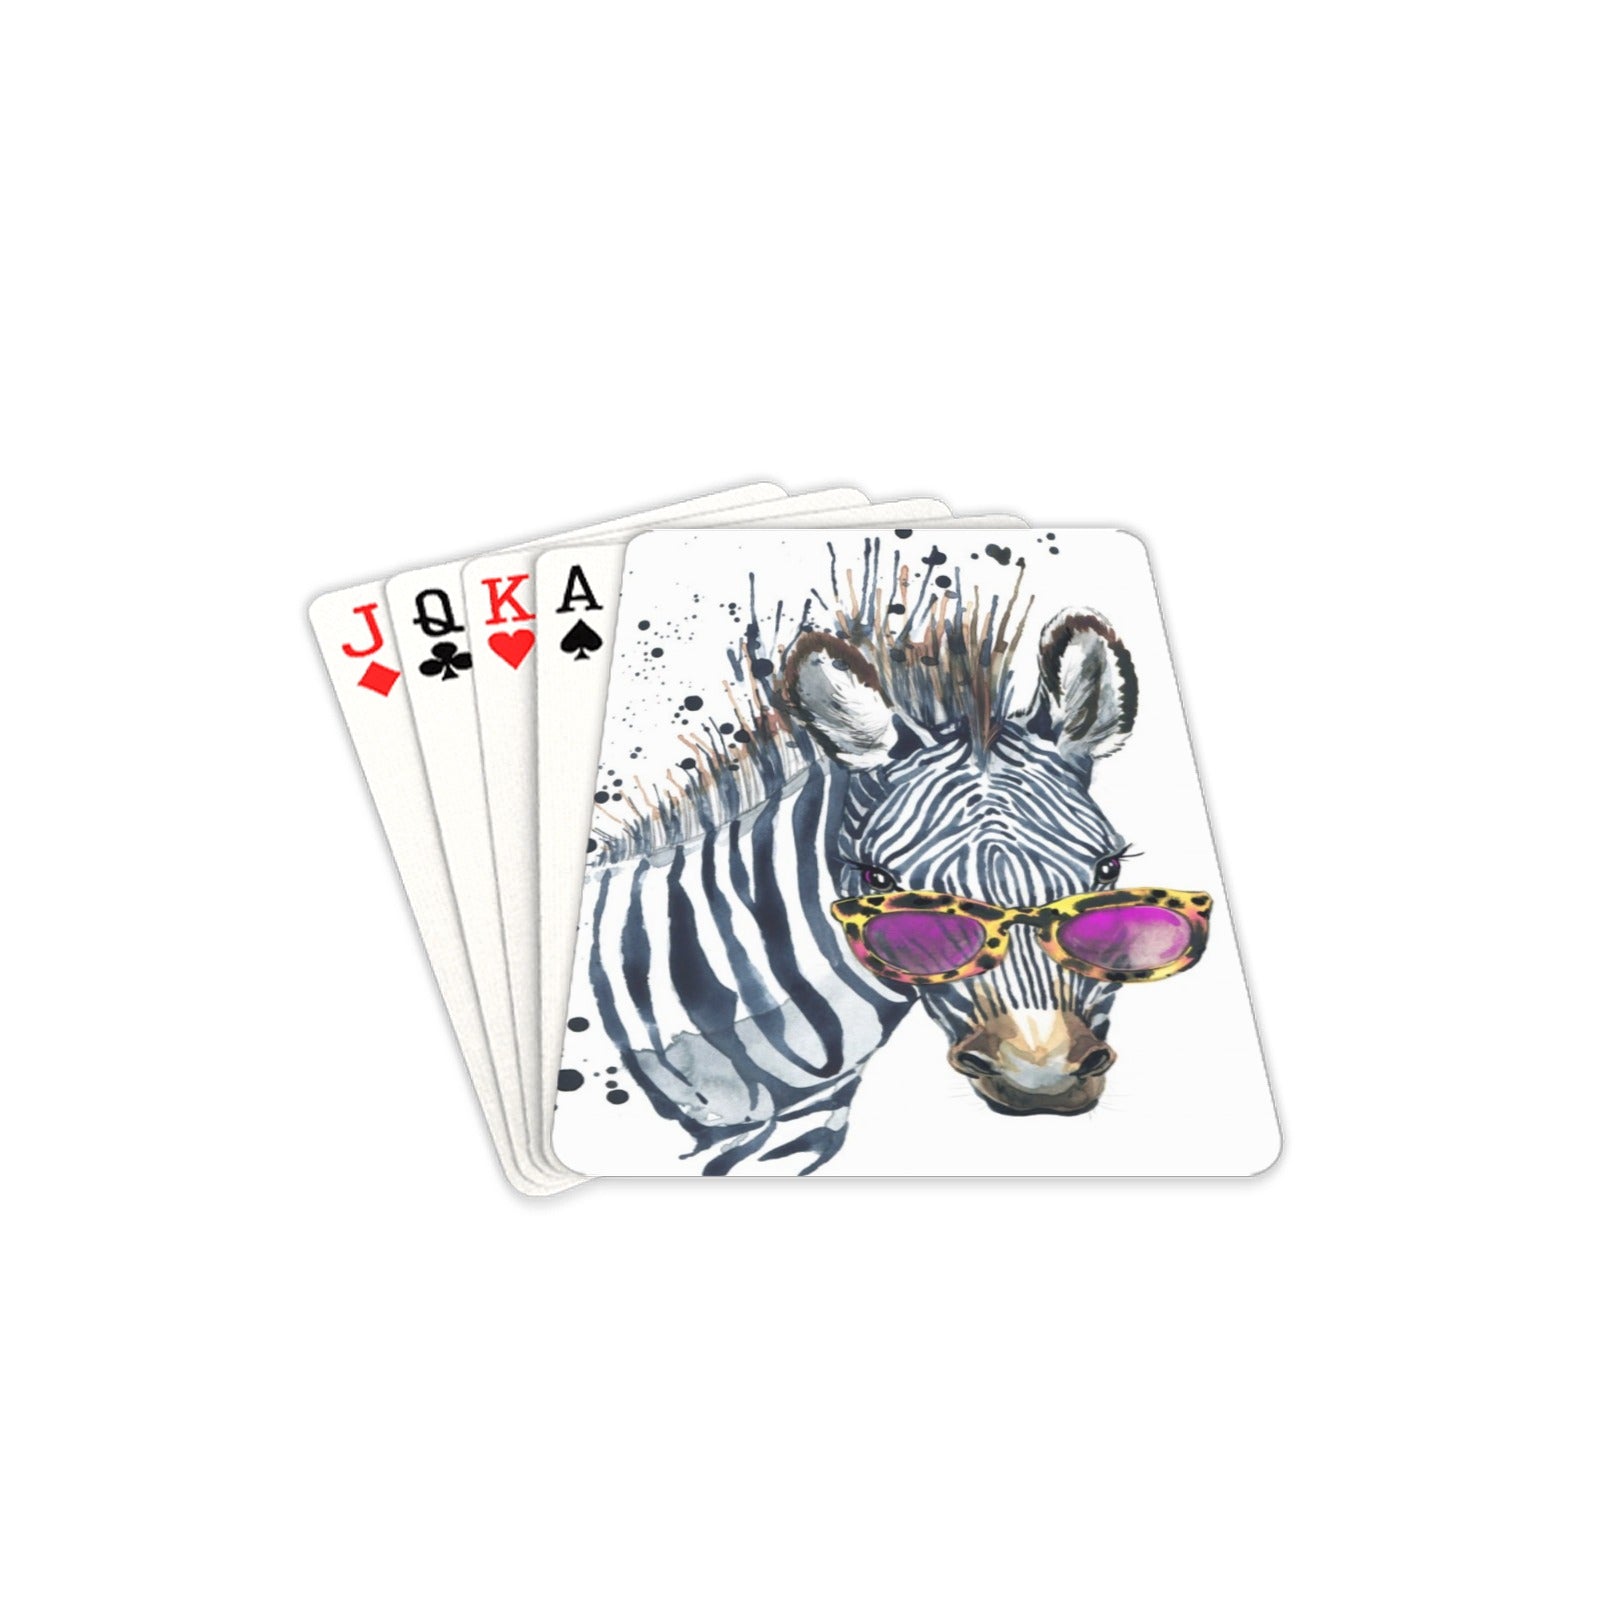 Cool Zebra - Playing Cards 2.5"x3.5" Playing Card 2.5"x3.5"